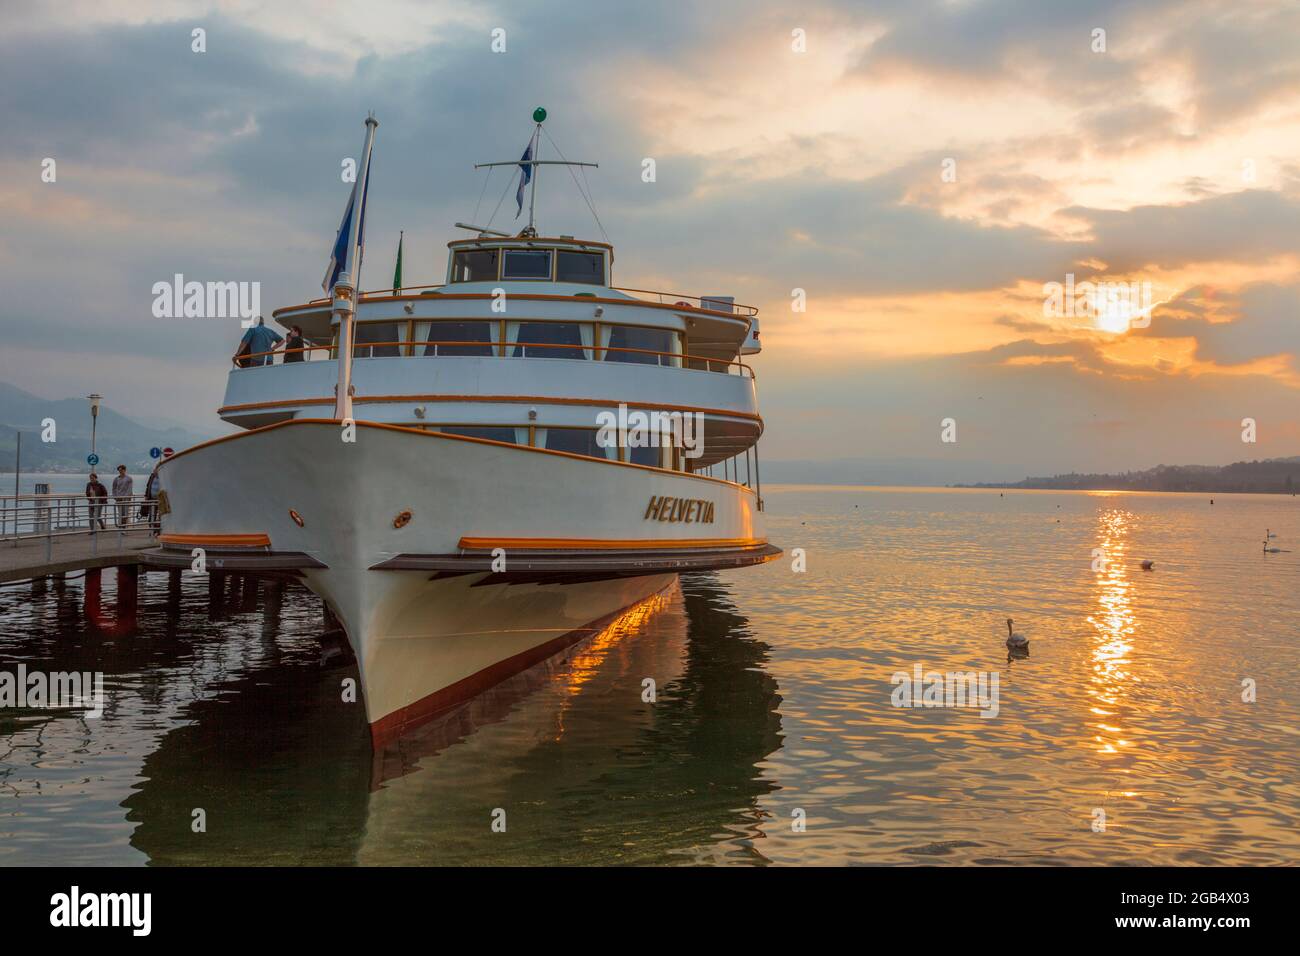 Helvetia ferry at Rapperswil on Lake Zurich Switzerland Stock Photo